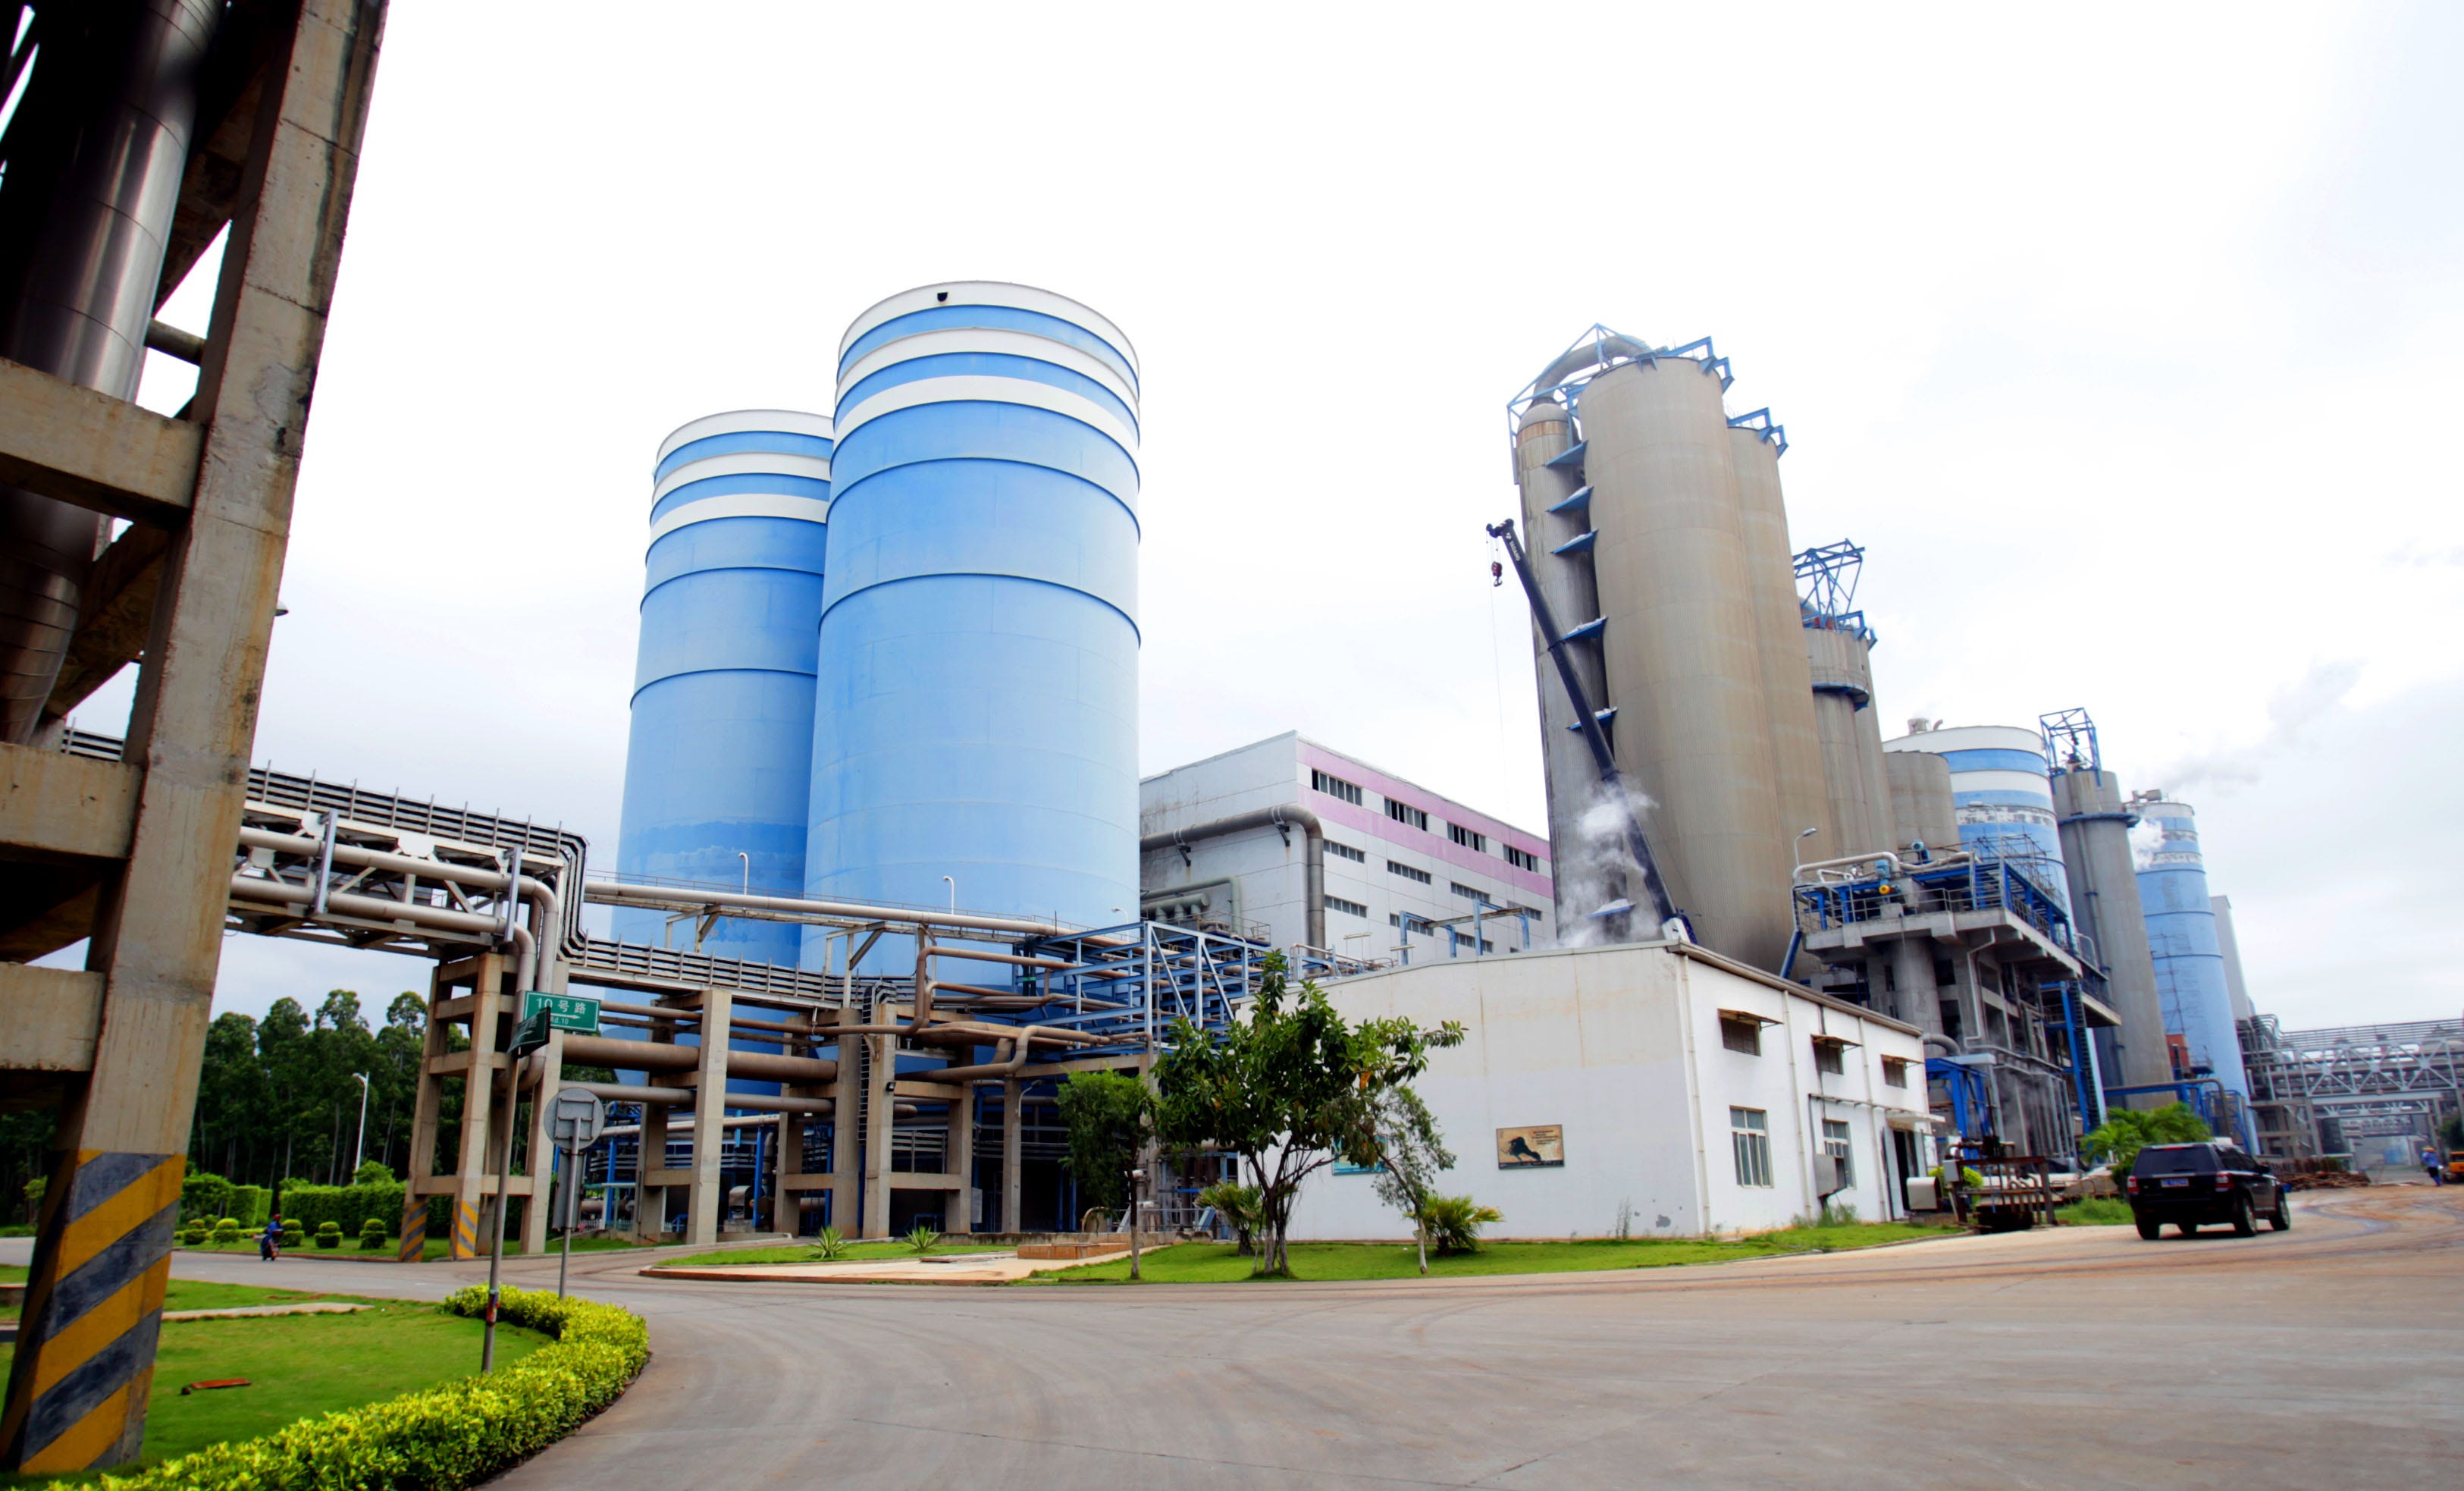 The area including the pulp making mill is seen. The left building is bleached pulp tower and right one is bleaching stage at the APP's (Asia Pulp and Paper) Hainan pulp and paper mill in Yangpu, China. The complex includes the biggest pulp mill in China.